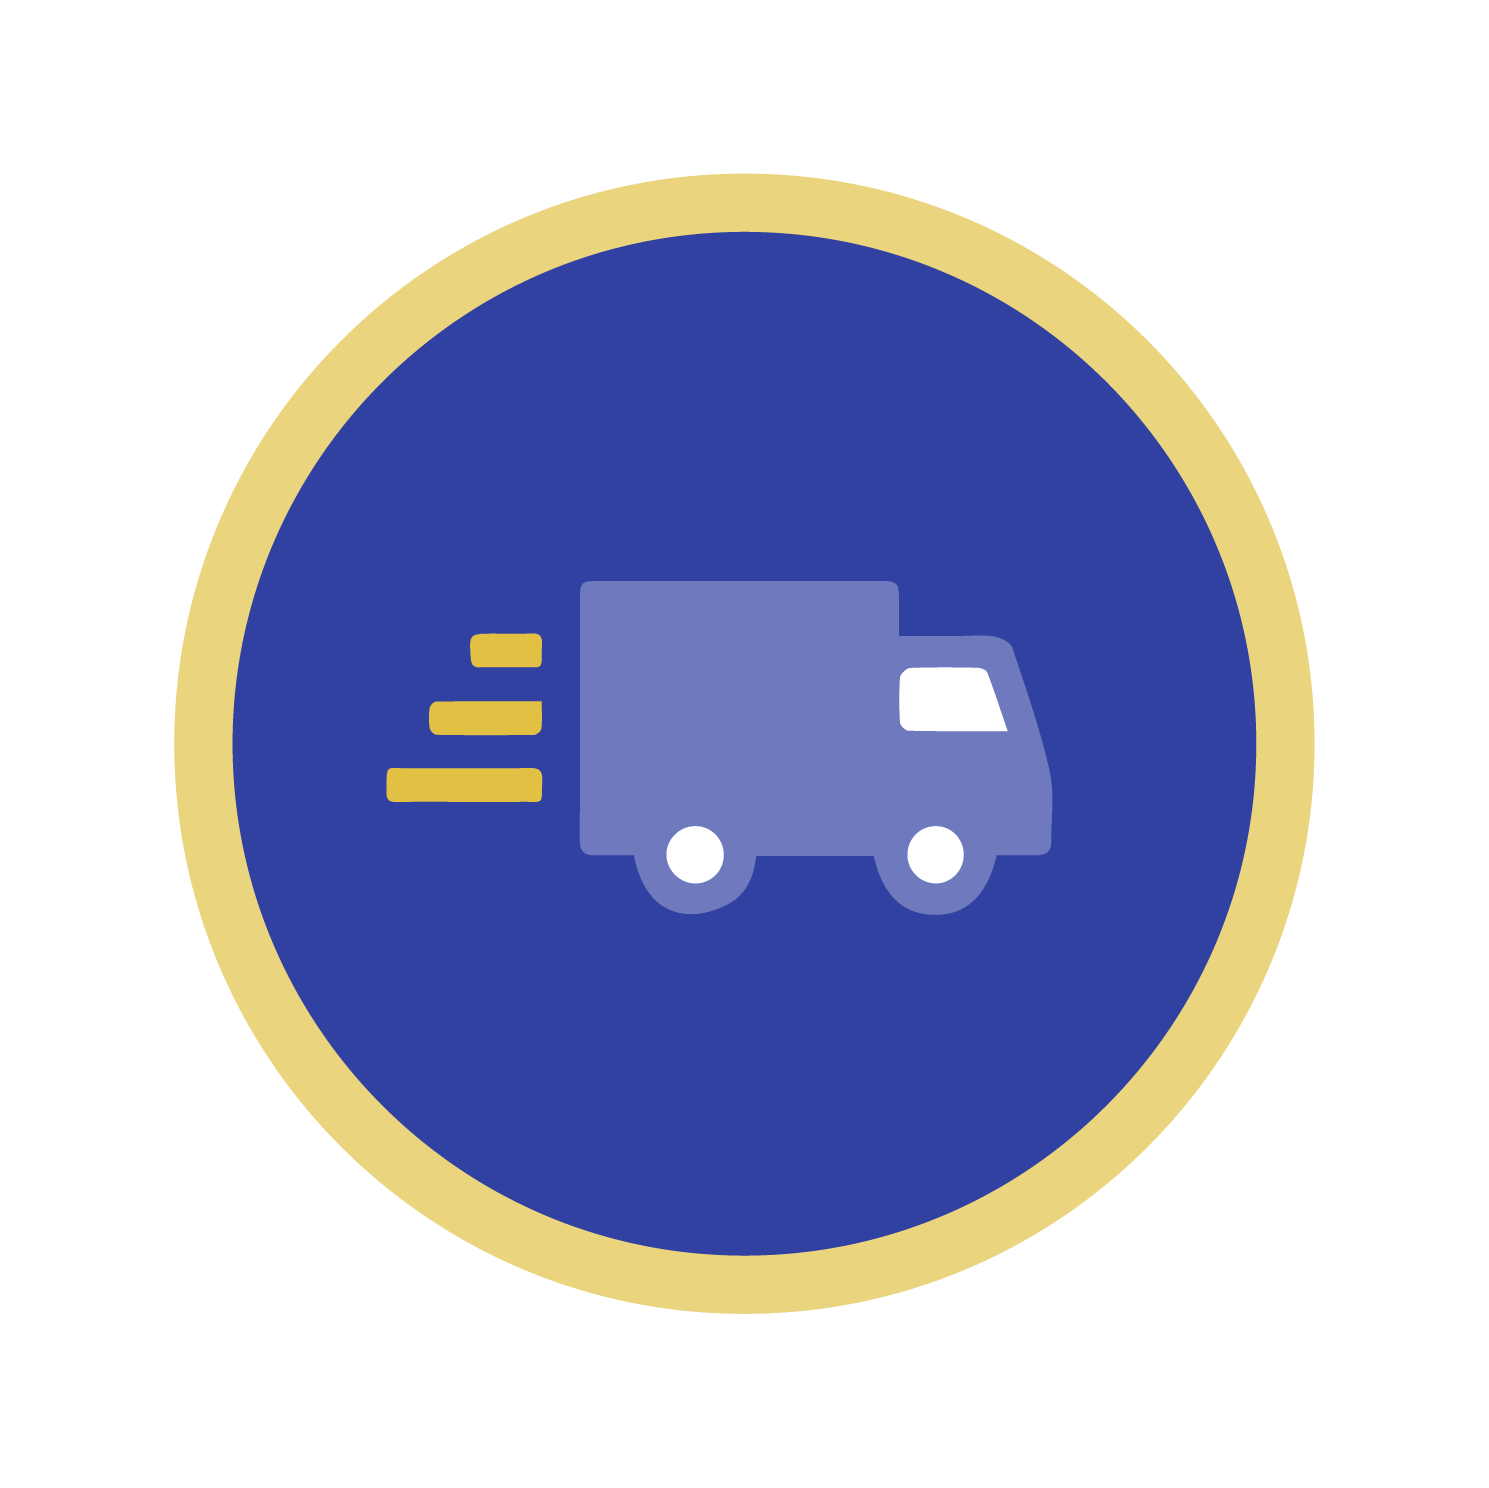 Truck driving away icon